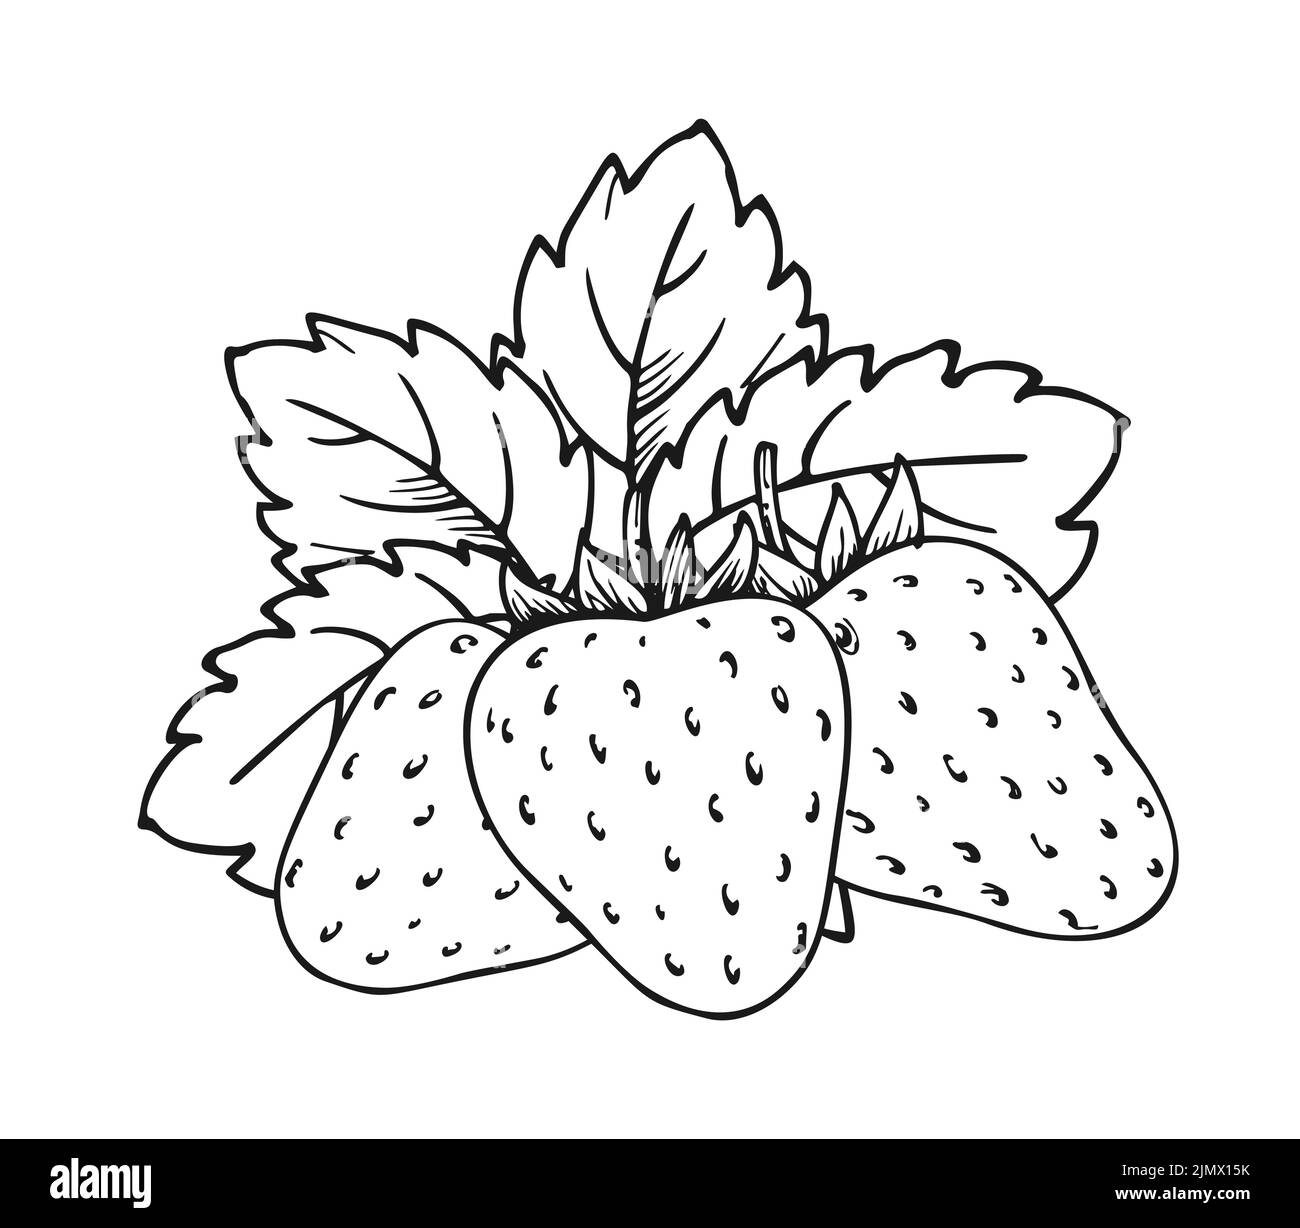 Strawberry bunch of three berries. Children and adults coloring book page. Whole ripe wild forest berry with leaves. Tasty sweet fresh fruit. Juicy strawberries handdrawn clip art black white sketch Stock Vector